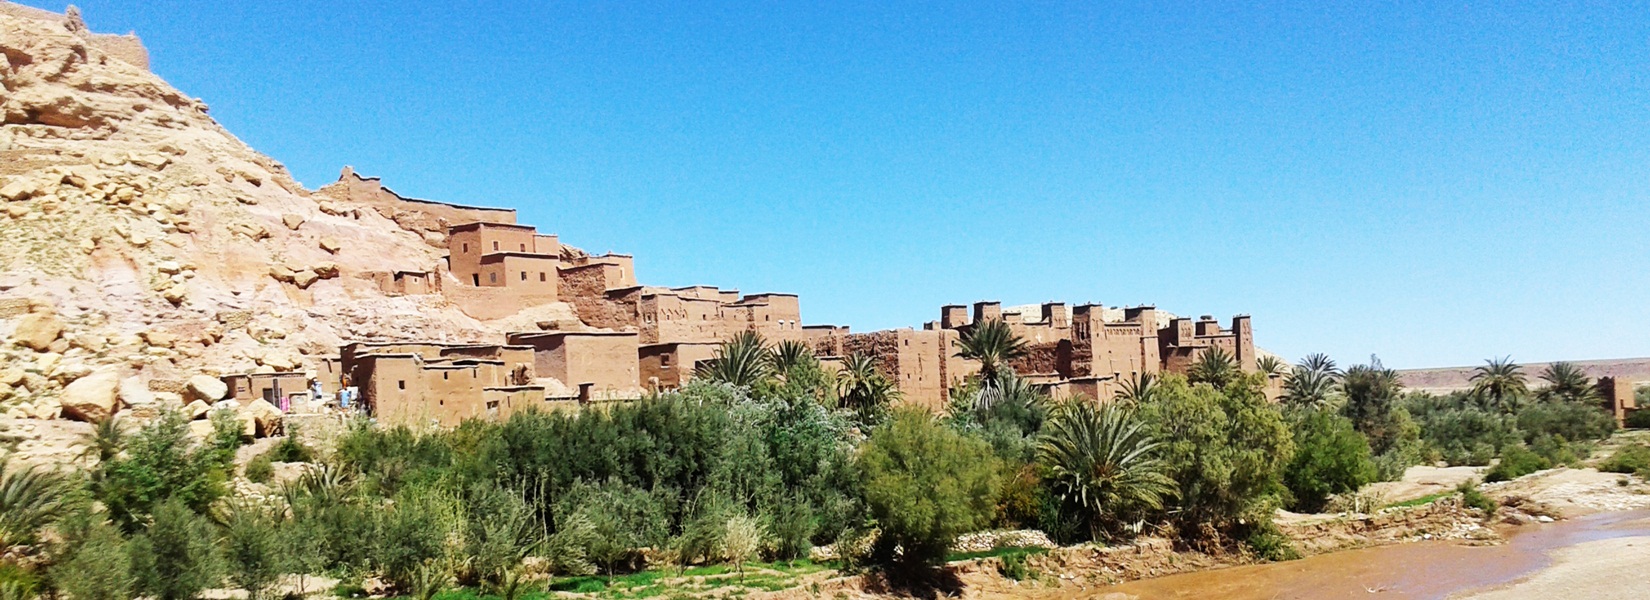 Day Trips & Excursions in Morocco